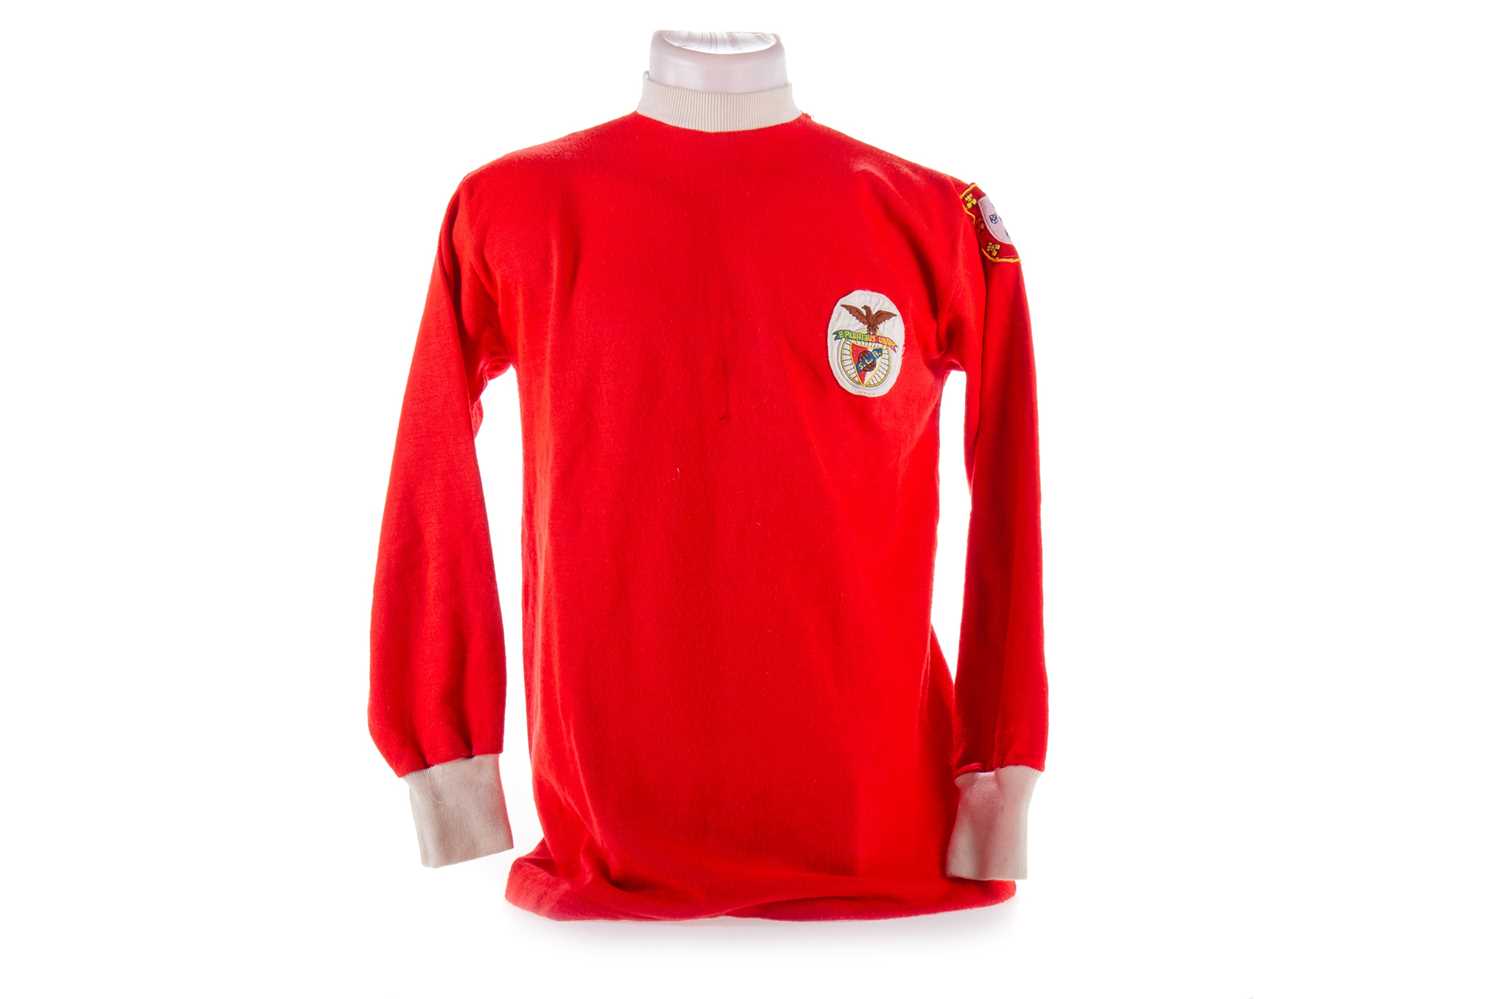 Lot 6 - S.L. BENFICA, EUROPEAN CUP 2ND ROUND JERSEY